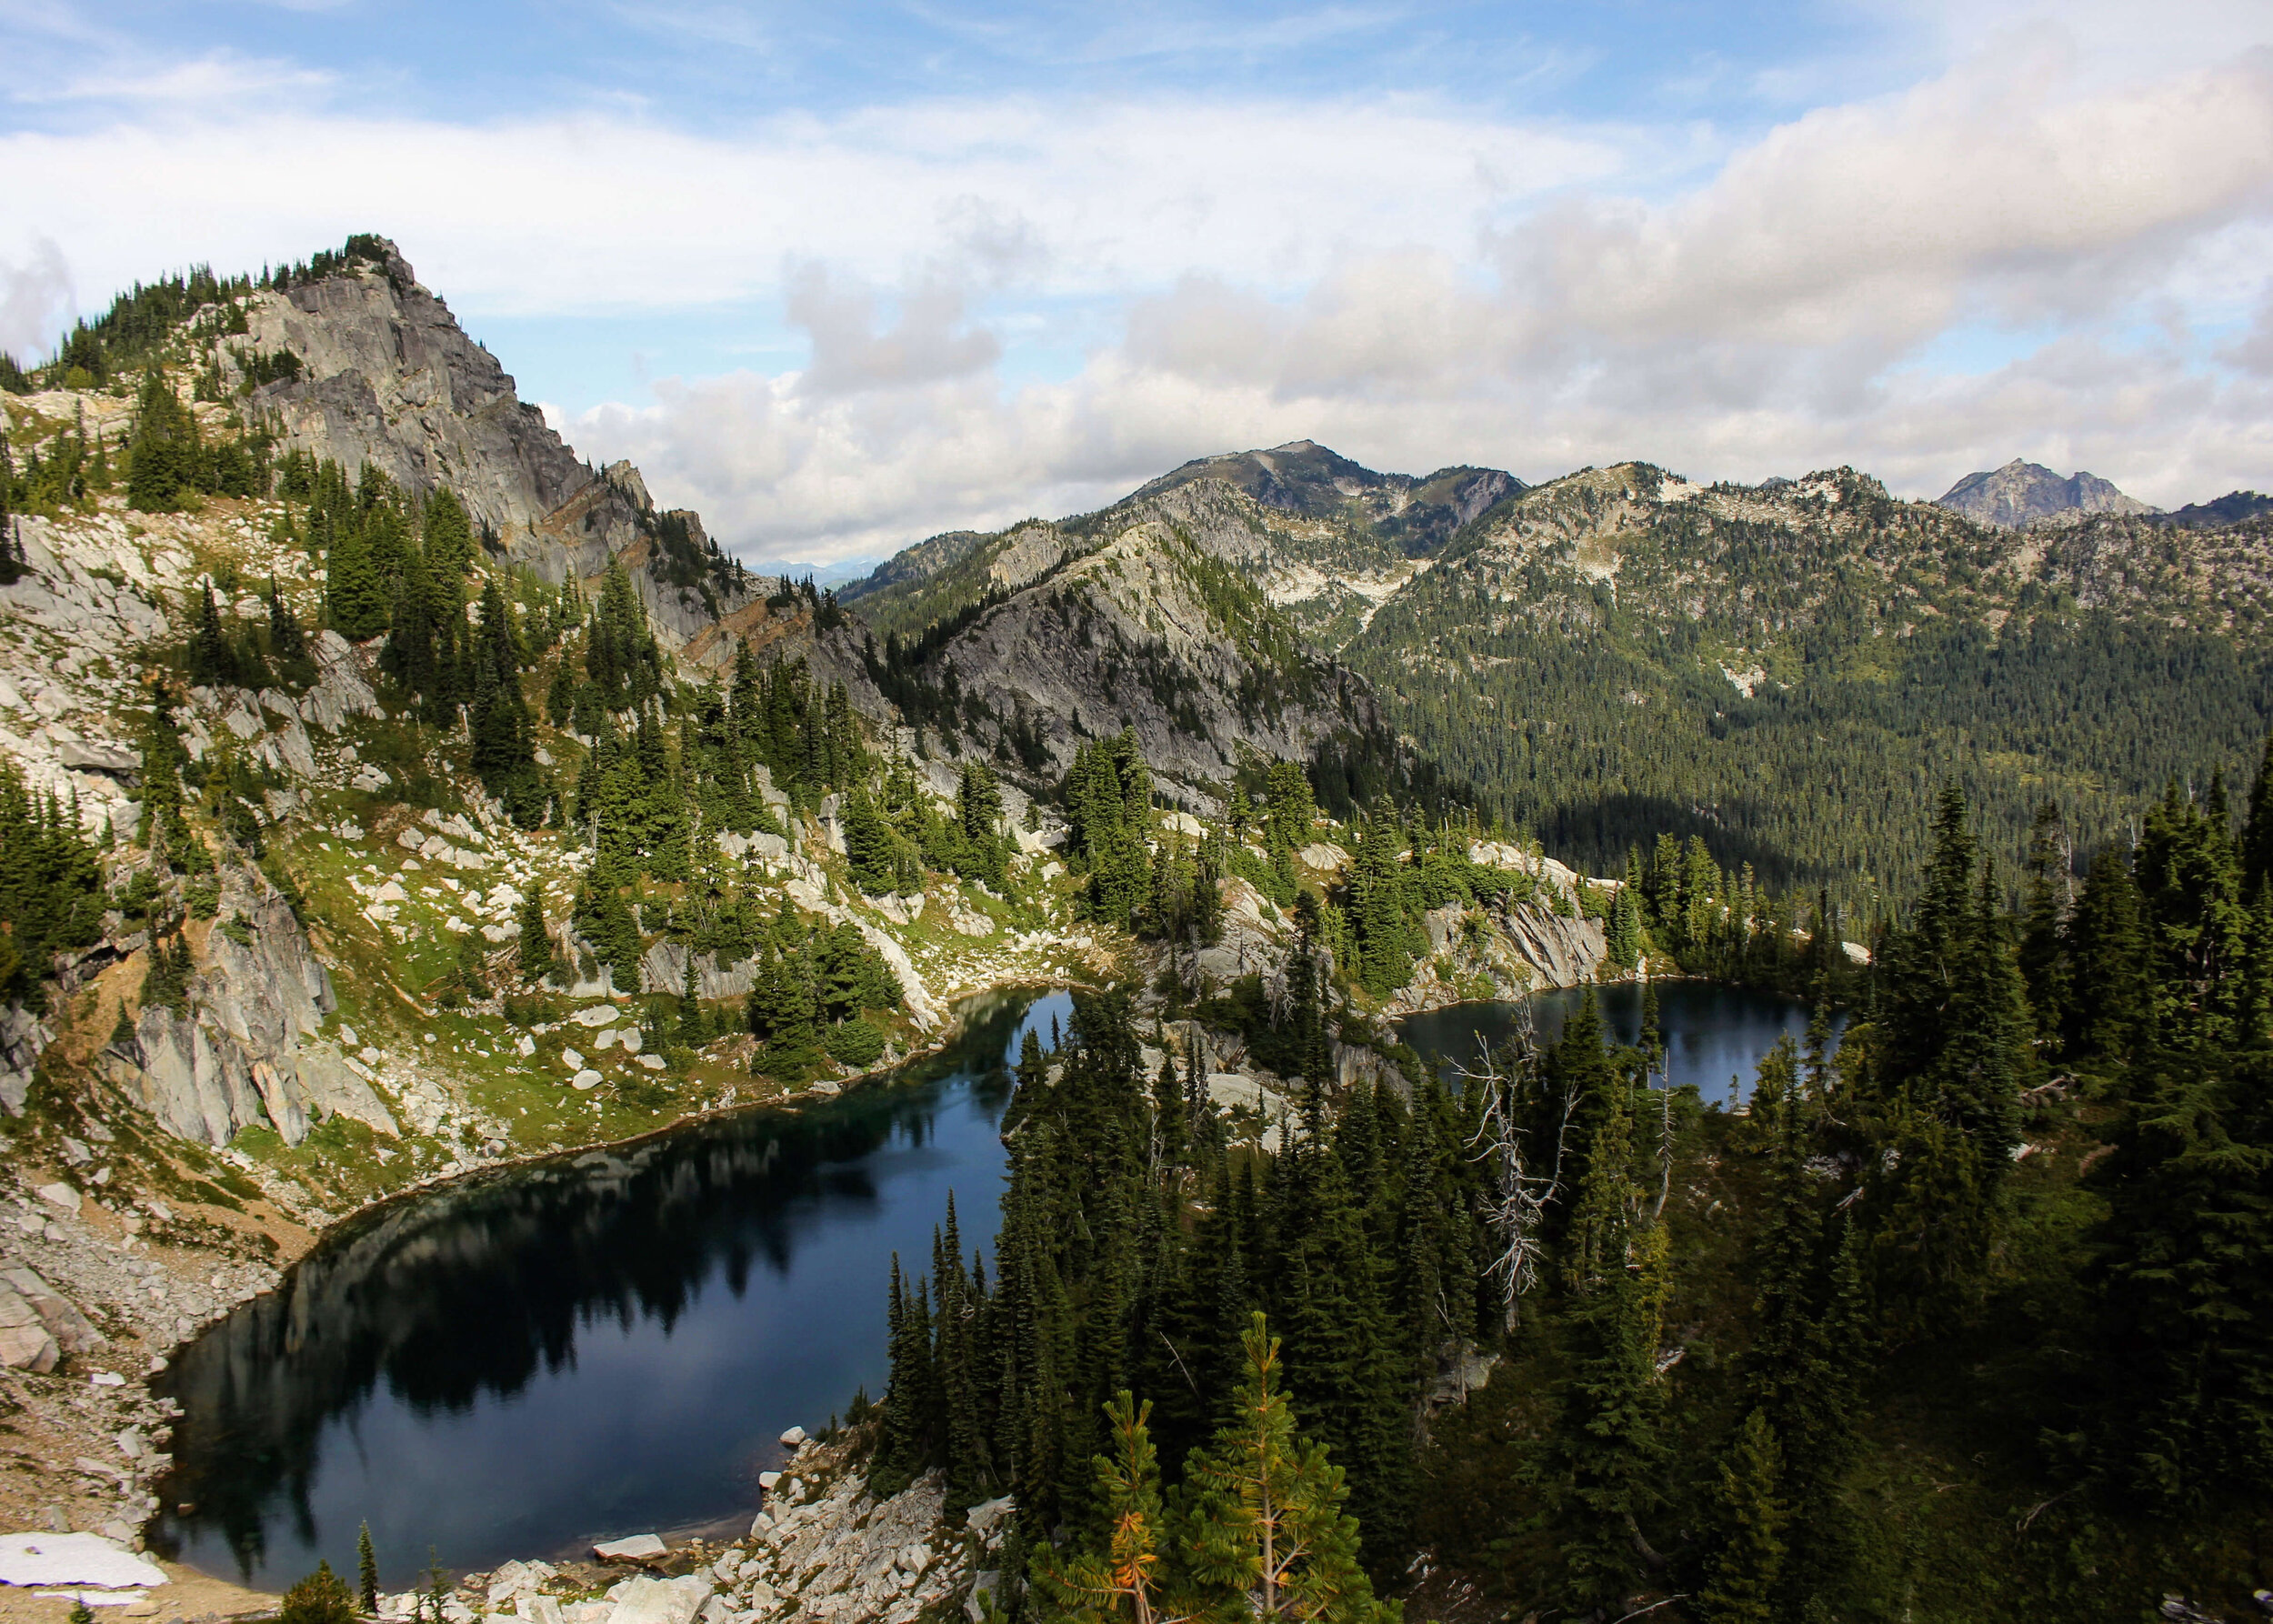 Hiking 101: How to Find Amazing Hiking Trails